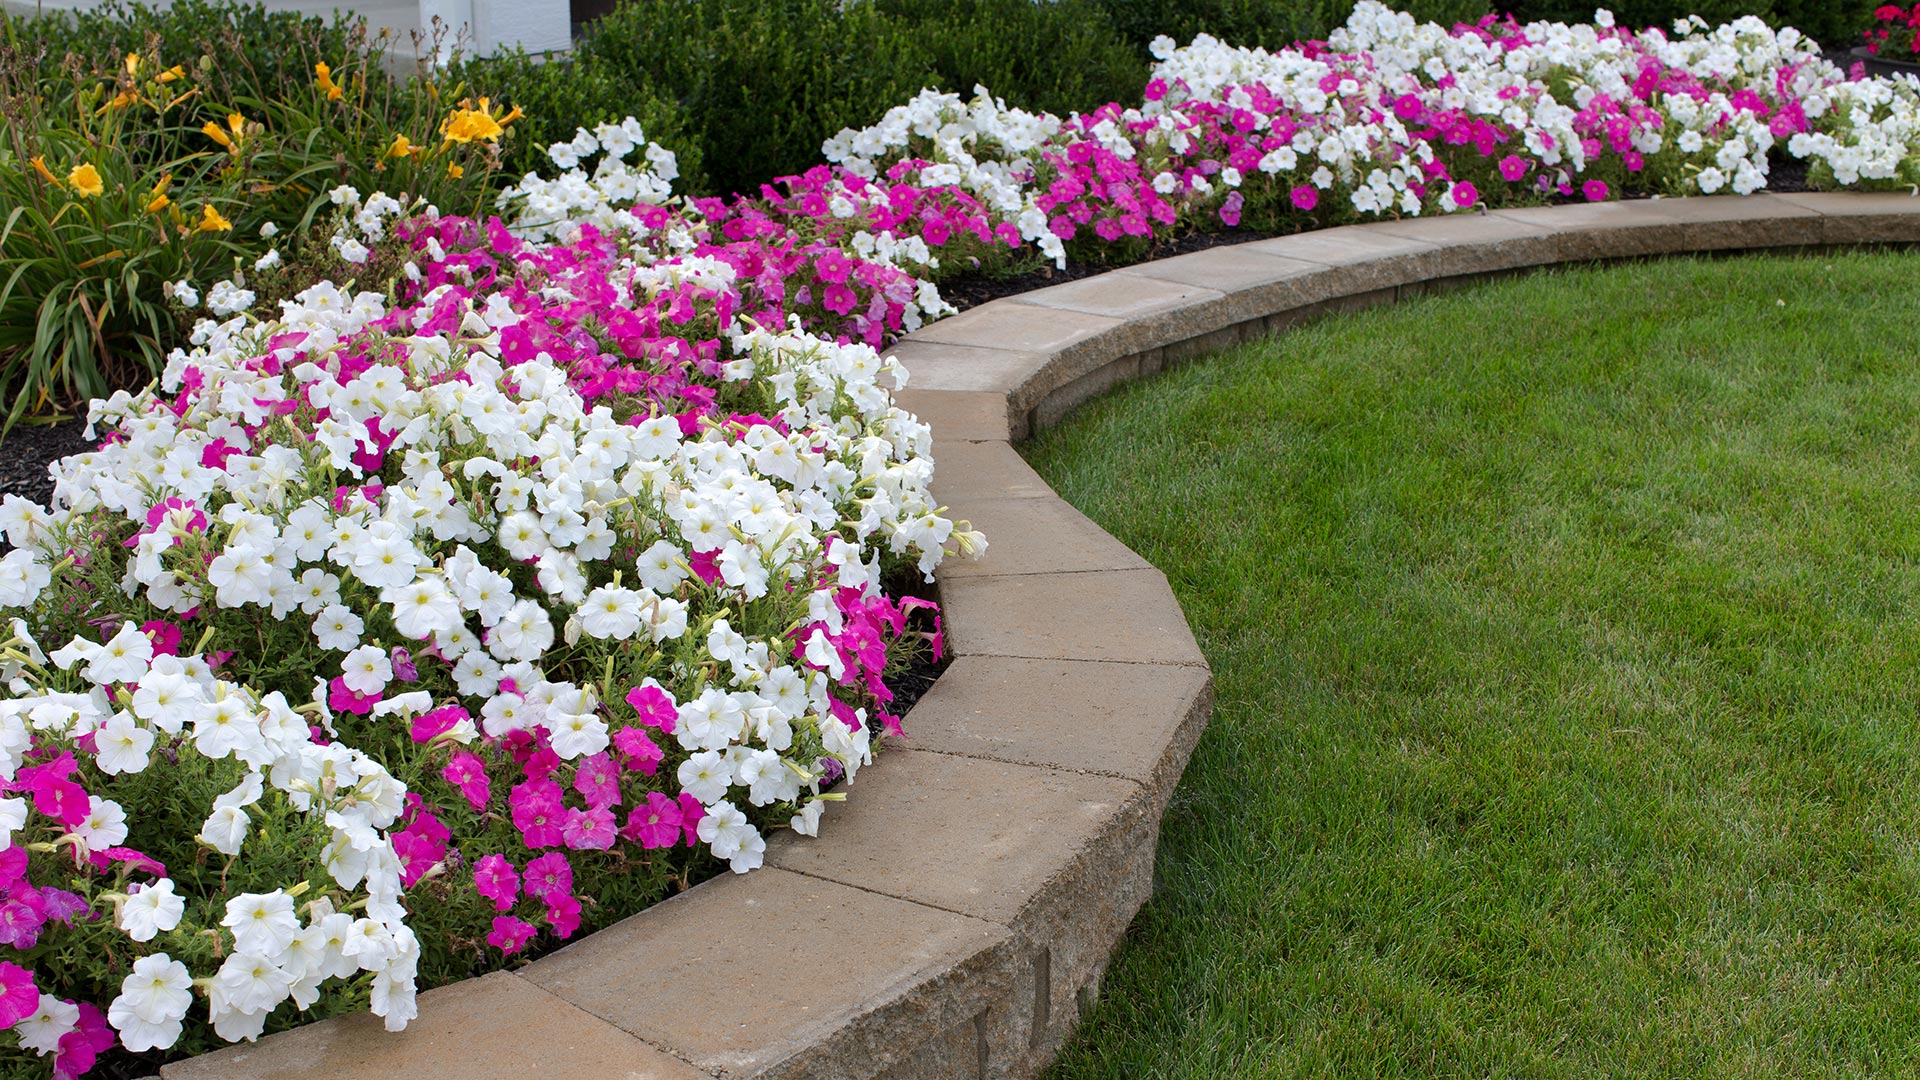 Retaining Walls - Where Function Meets Design